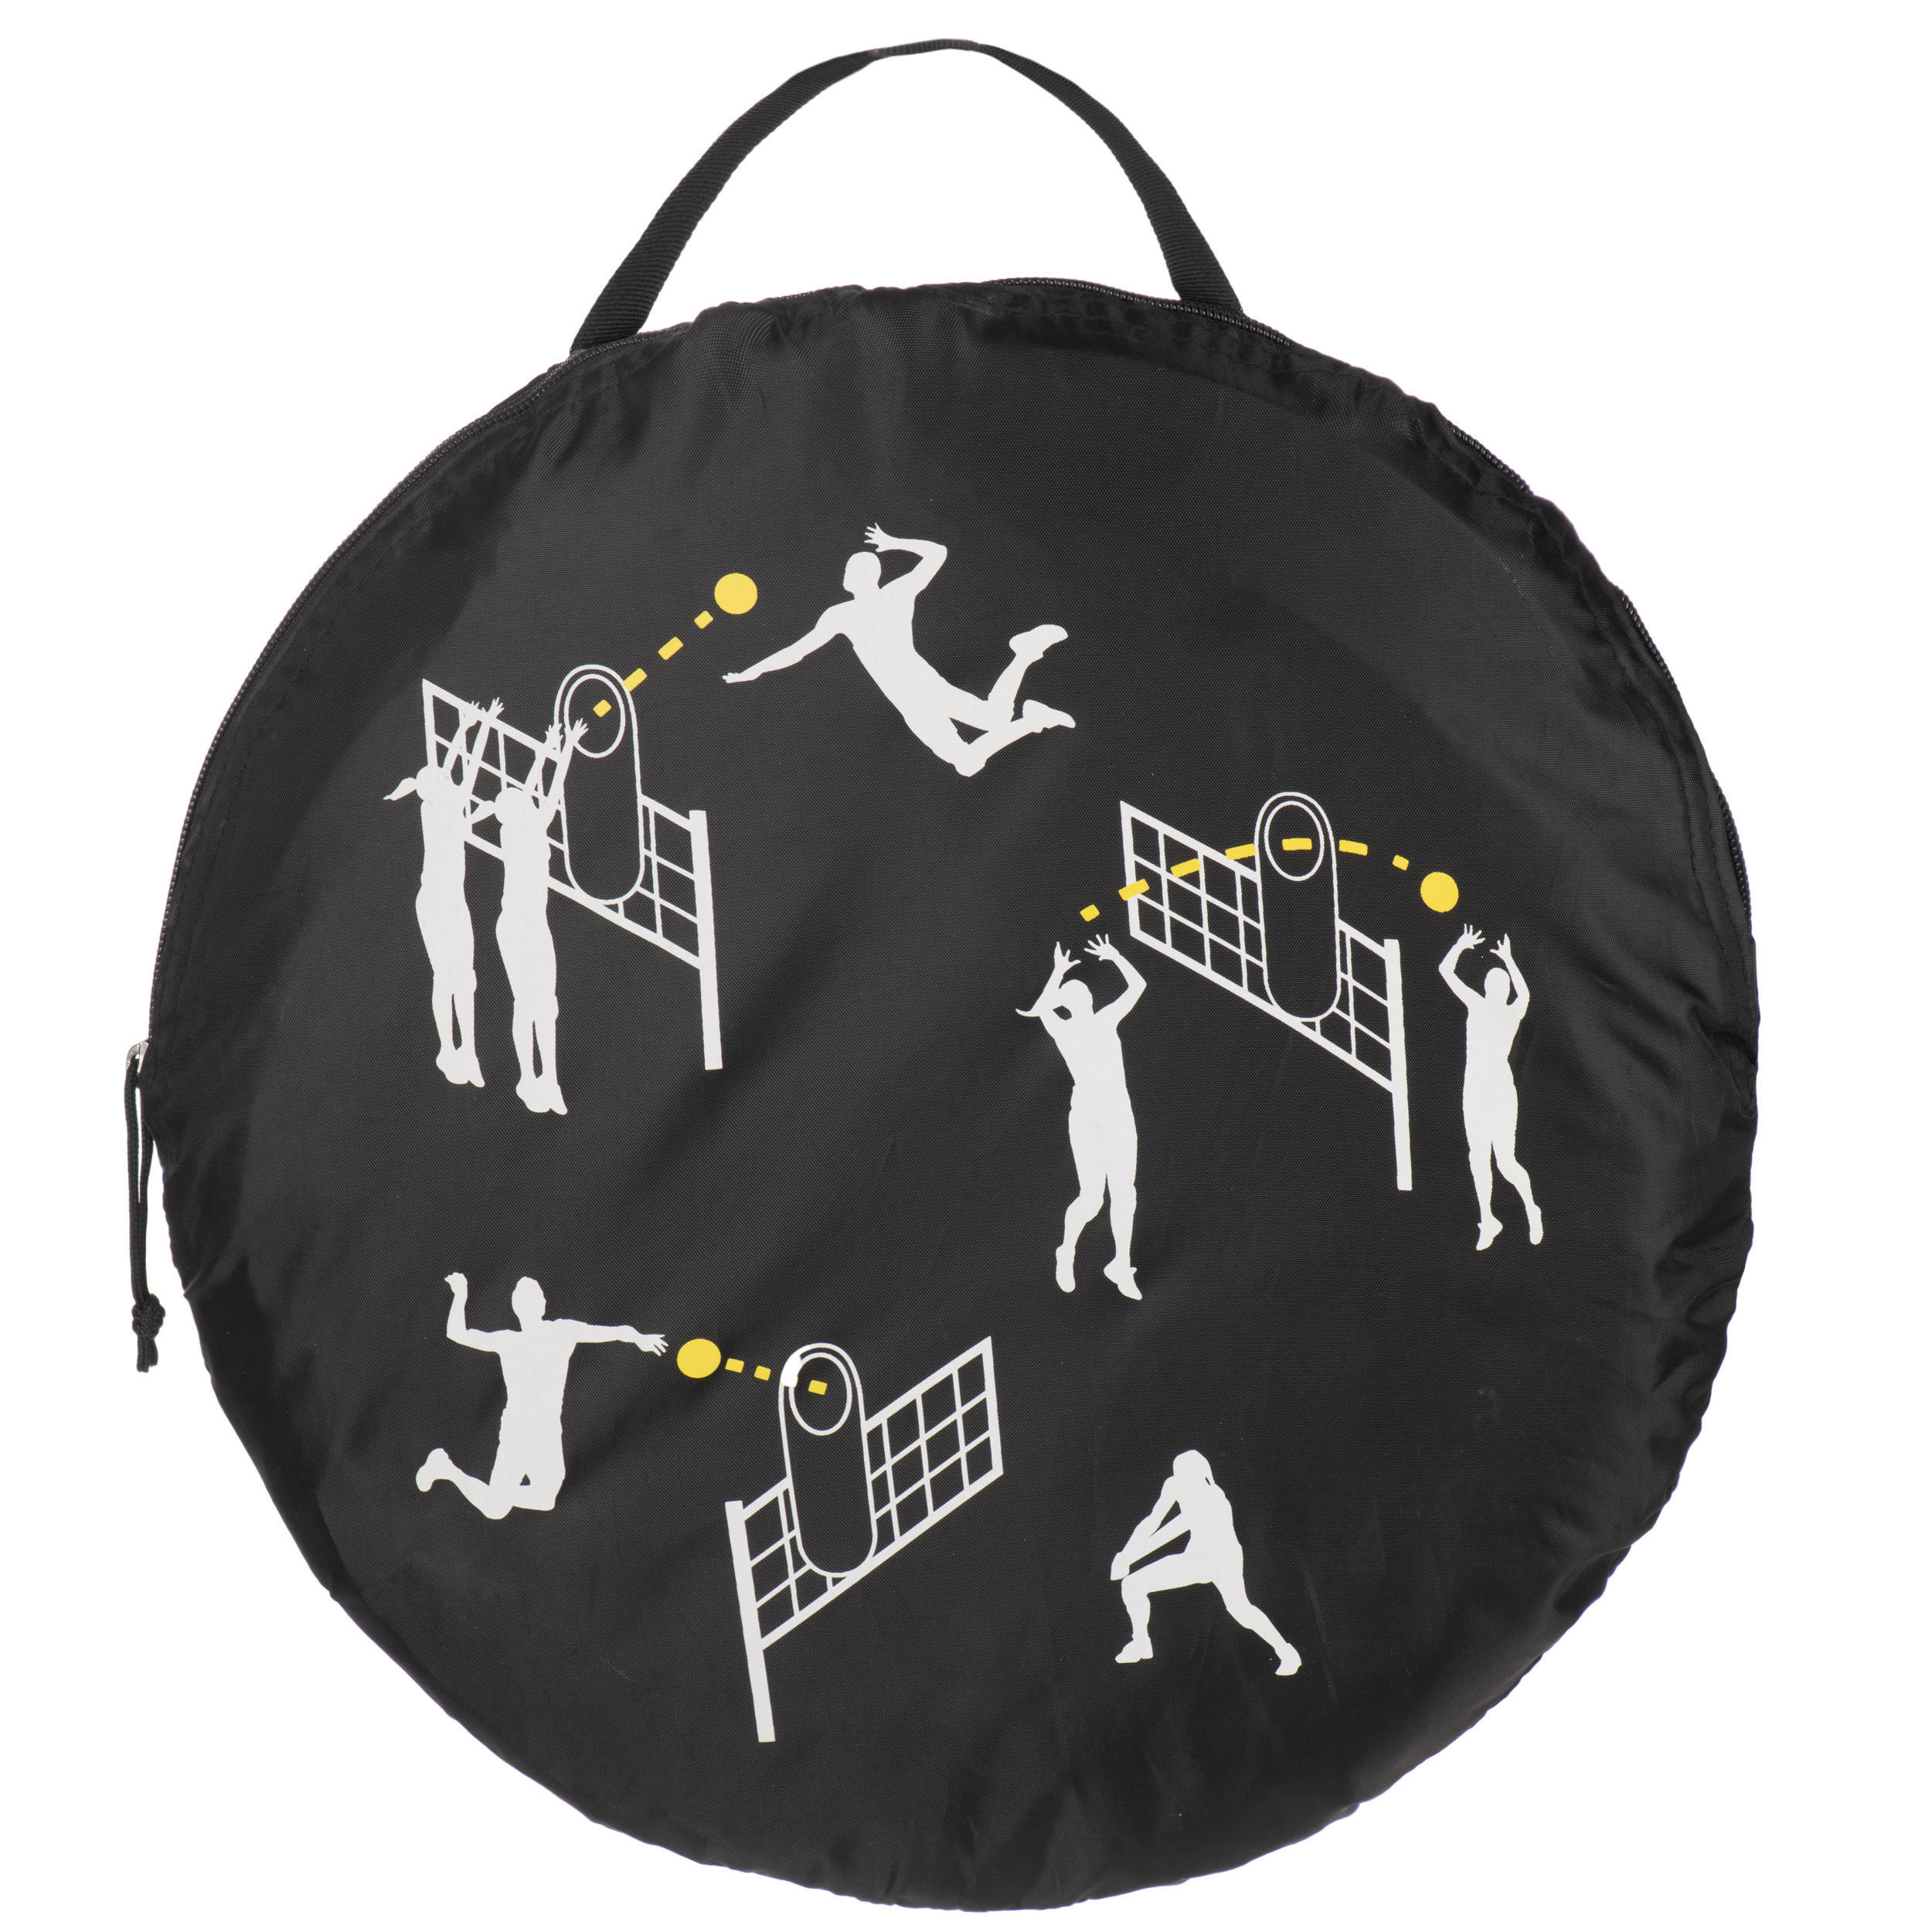 Volleyball Training Target for All Levels VNT900 4/4